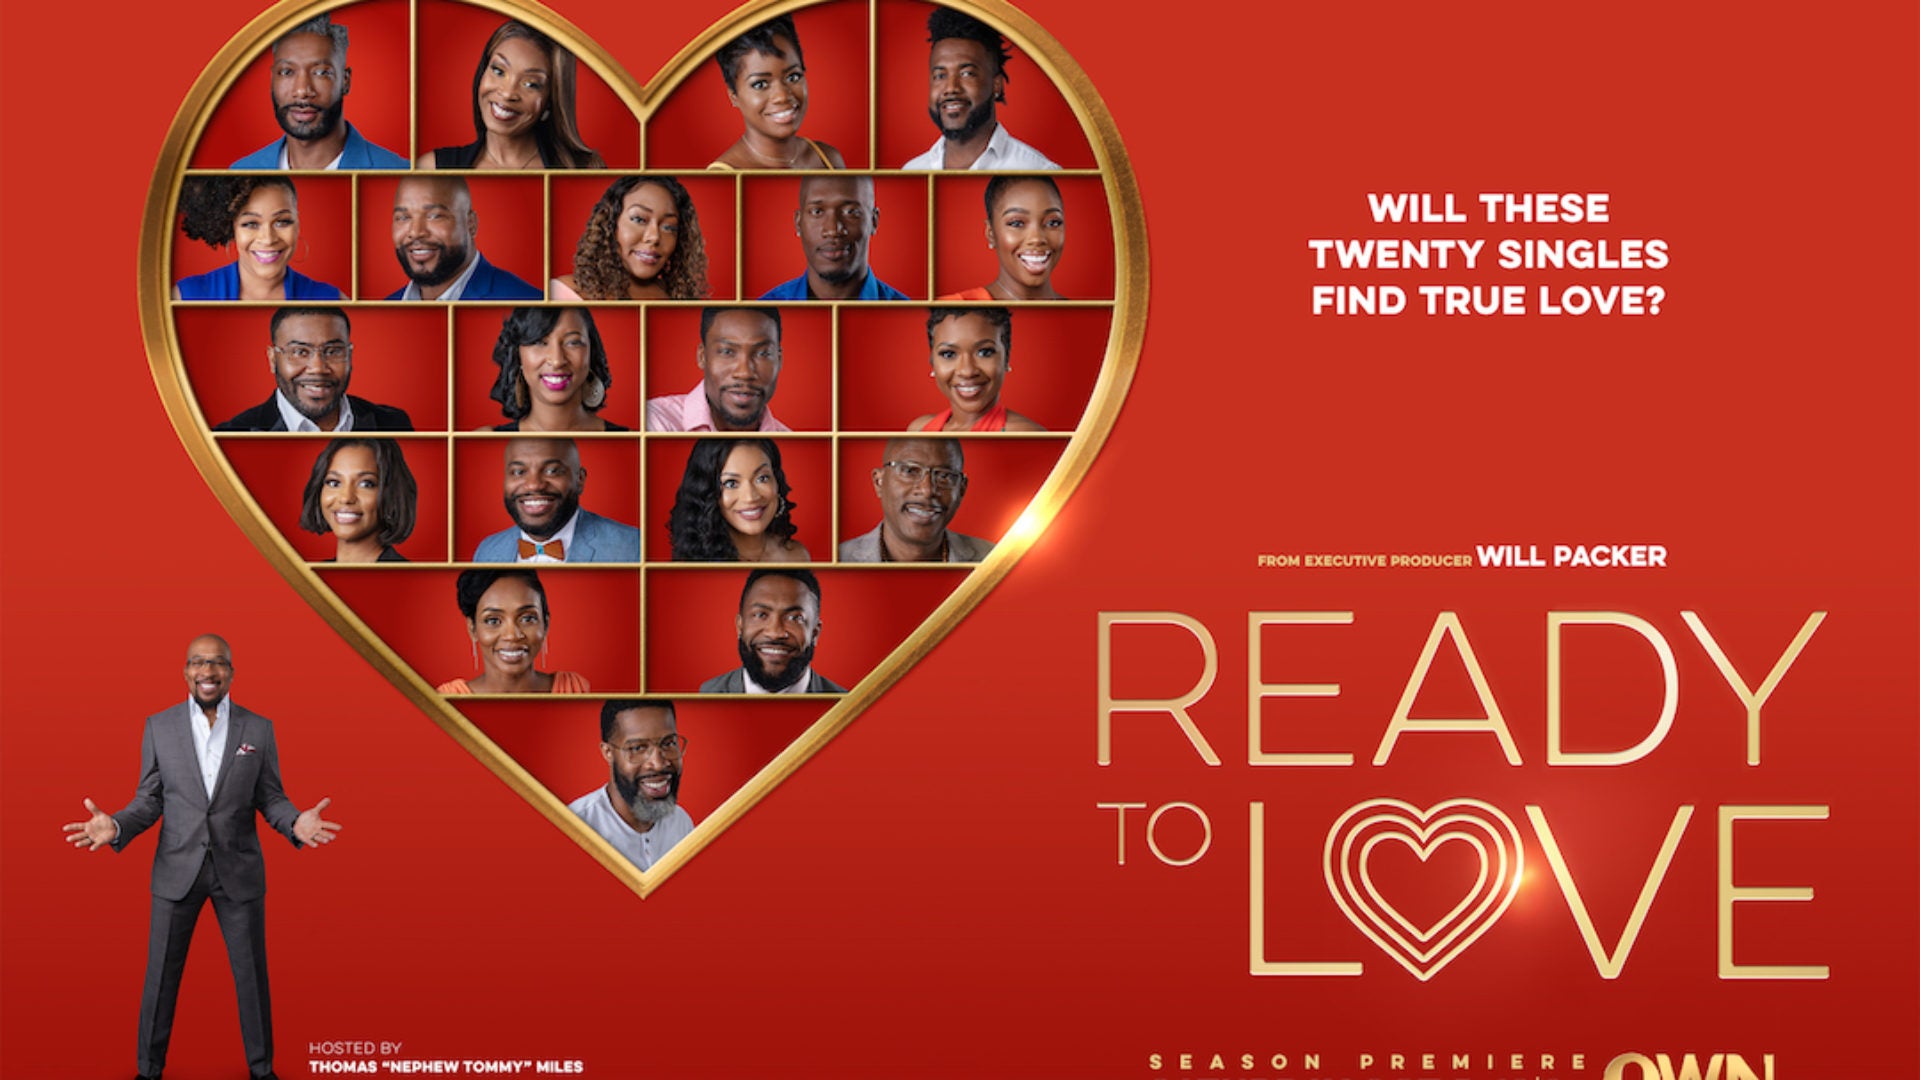 A New Group Of Singles Takes Over Atlanta In 'Ready To Love' Trailer